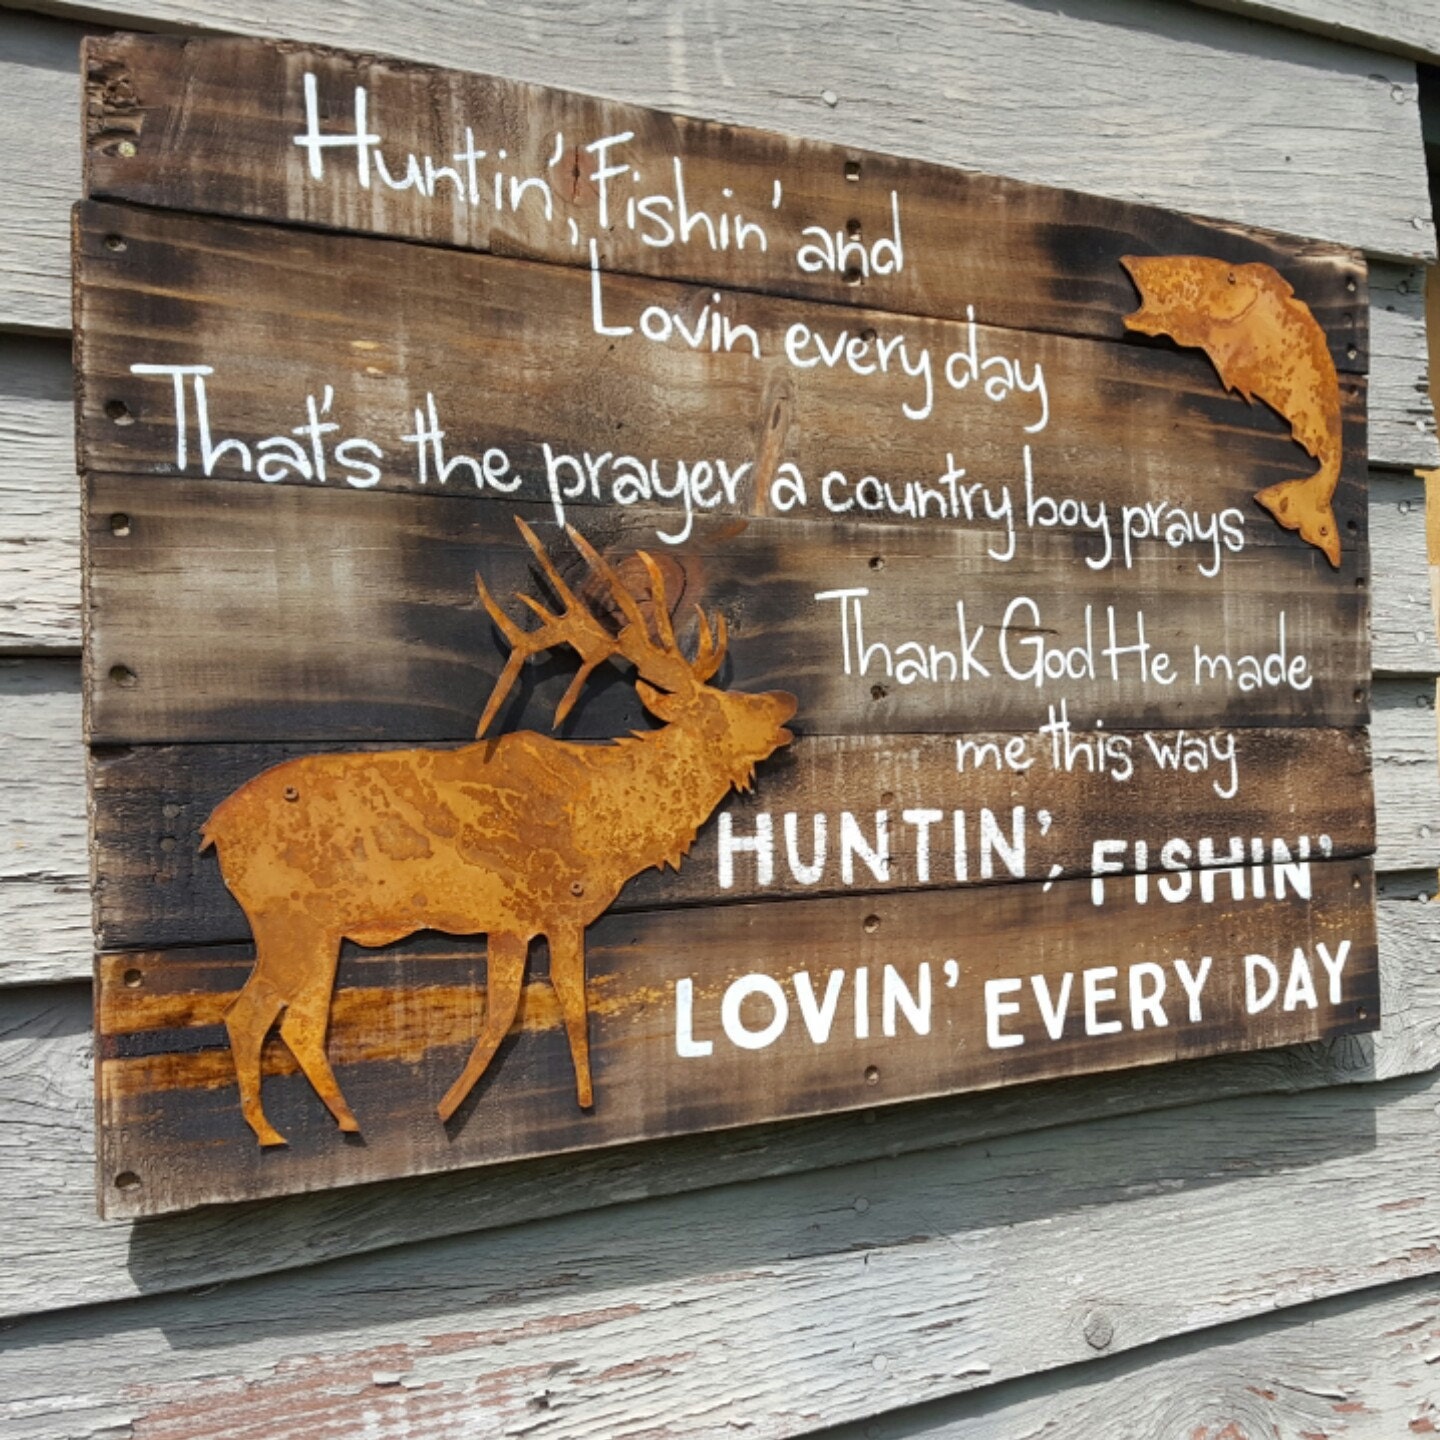 Download Huntin' Fishin' Lovin' every day Rustic Wood Sign by CharaWorks